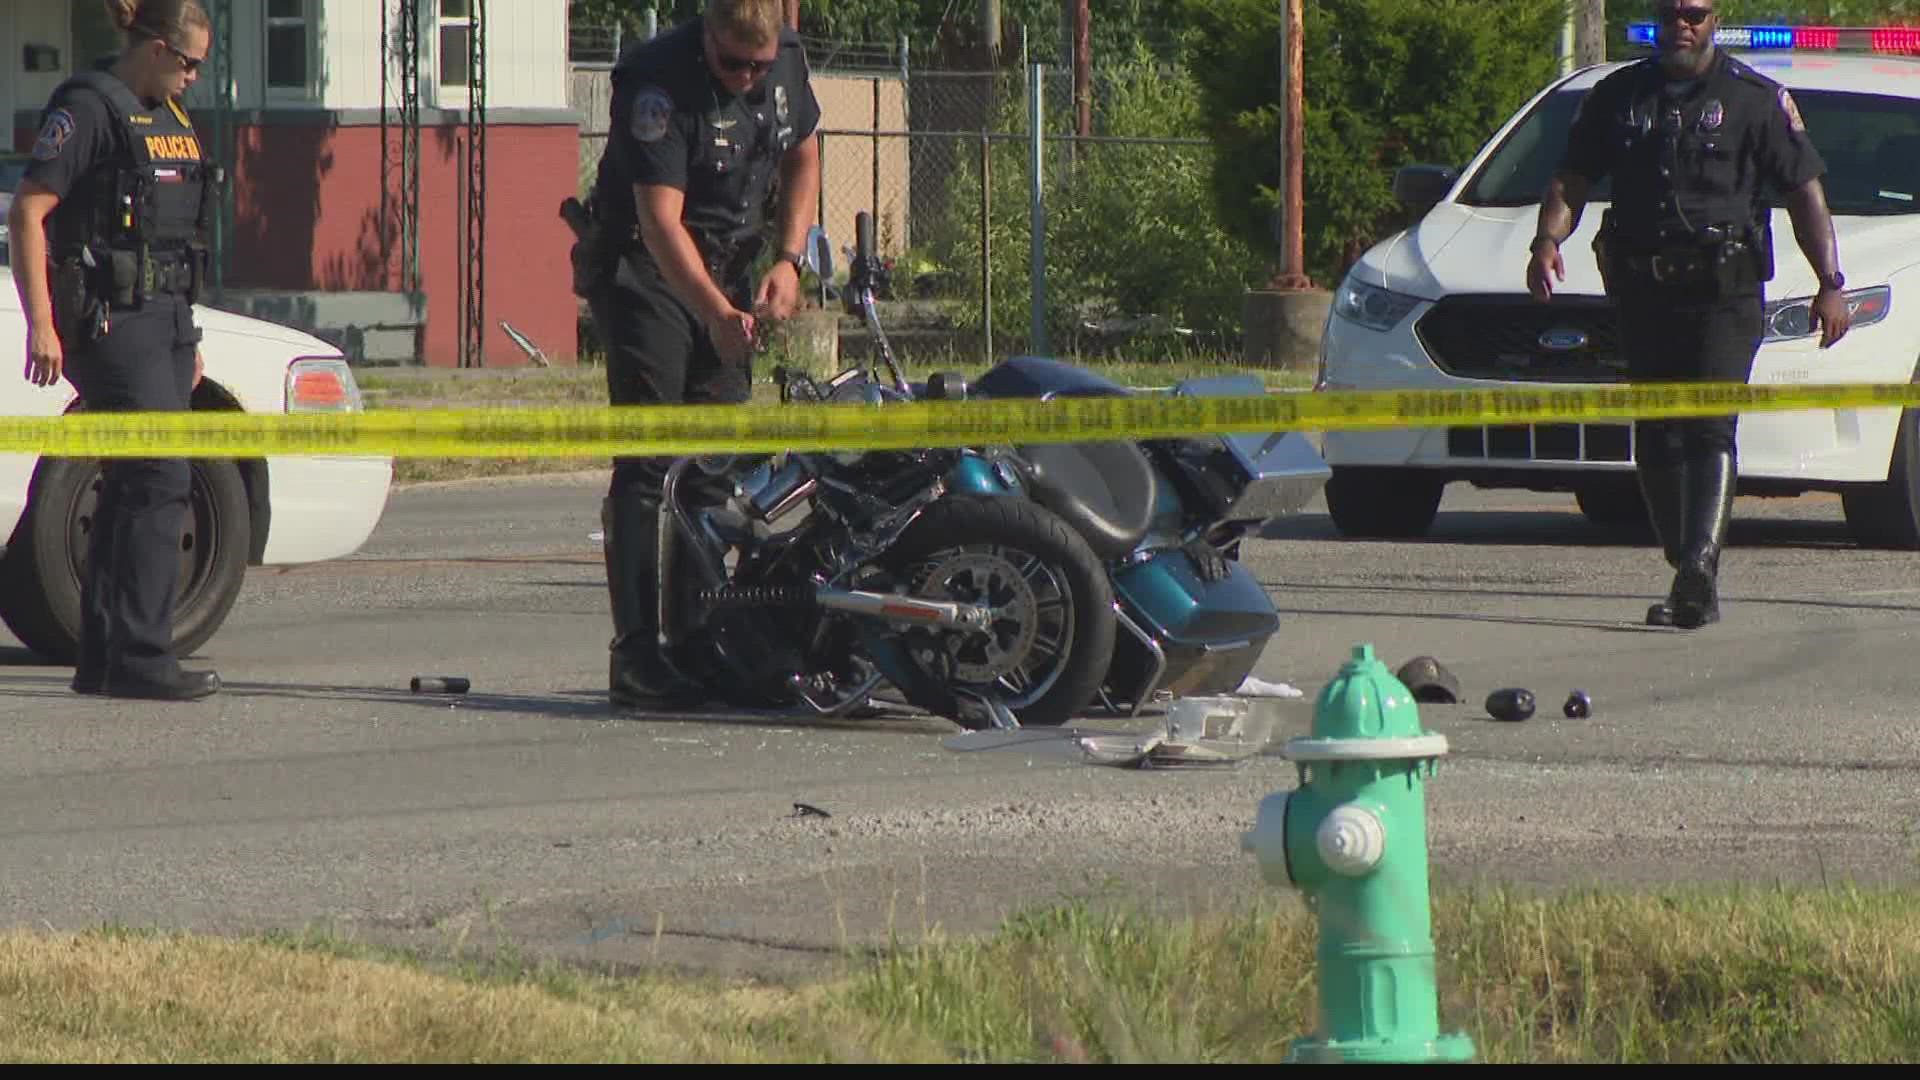 It's the fourth crash in four days involving an Indiana police officer.